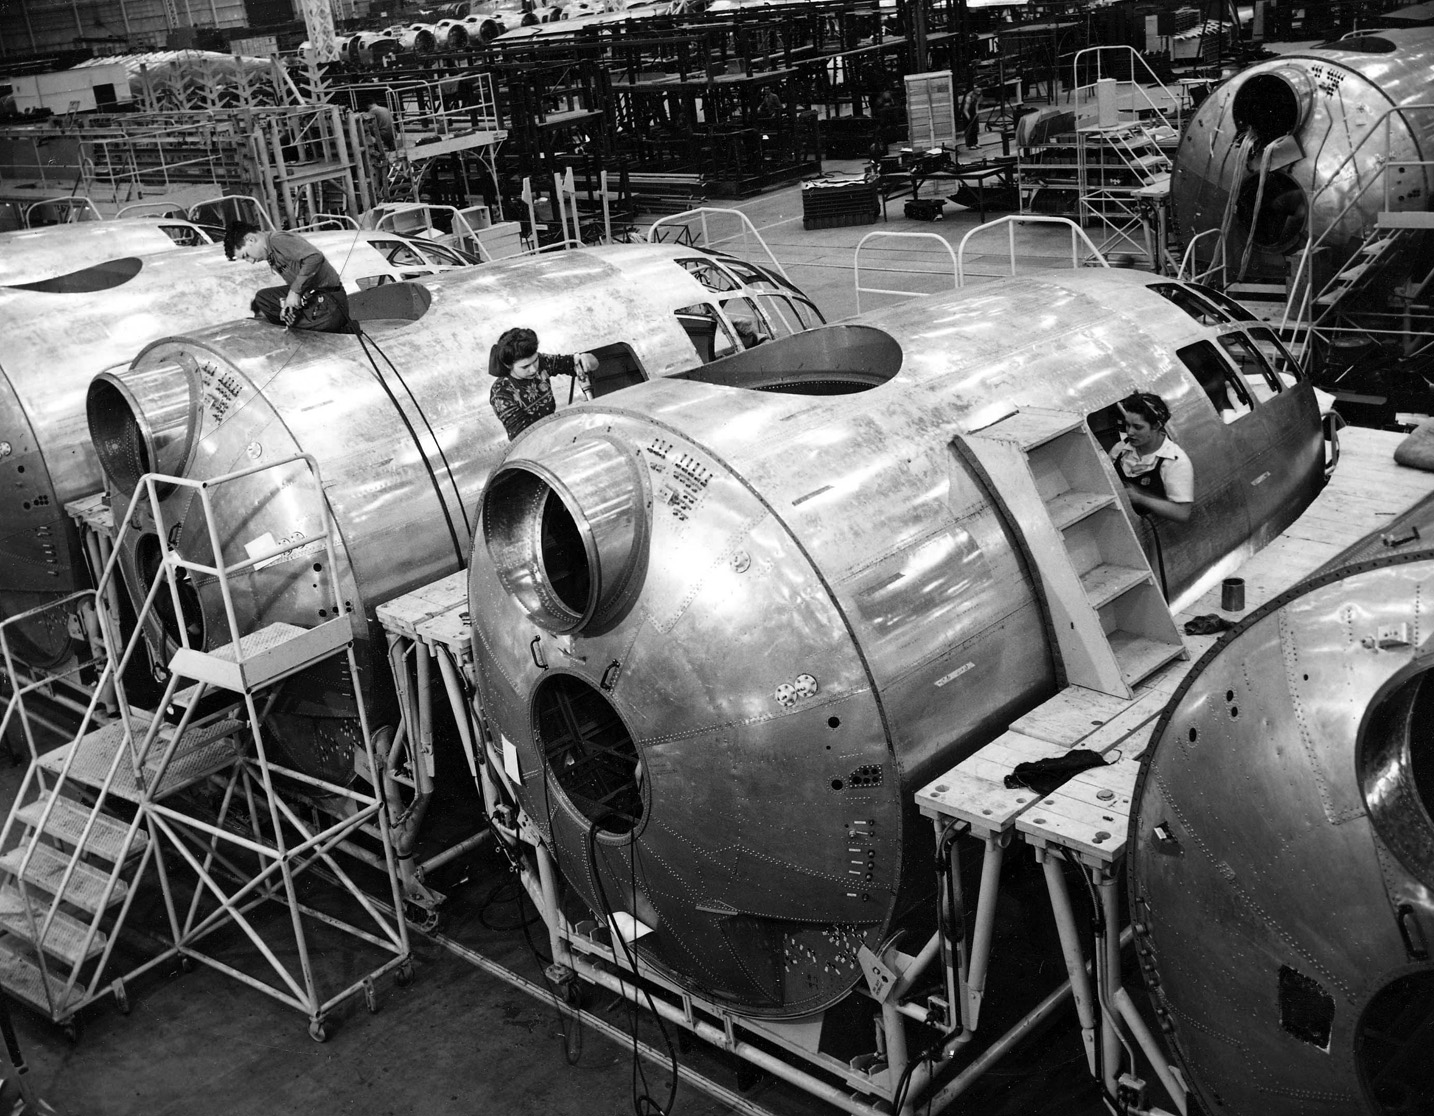 Along with the computerized system that controlled and coordinated the fire of the B-29’s defensive machine guns, the bomber was also the first operational plane of its type with a pressurized cabin. These factory workers are assembling a pressurized cockpit on their factory floor.